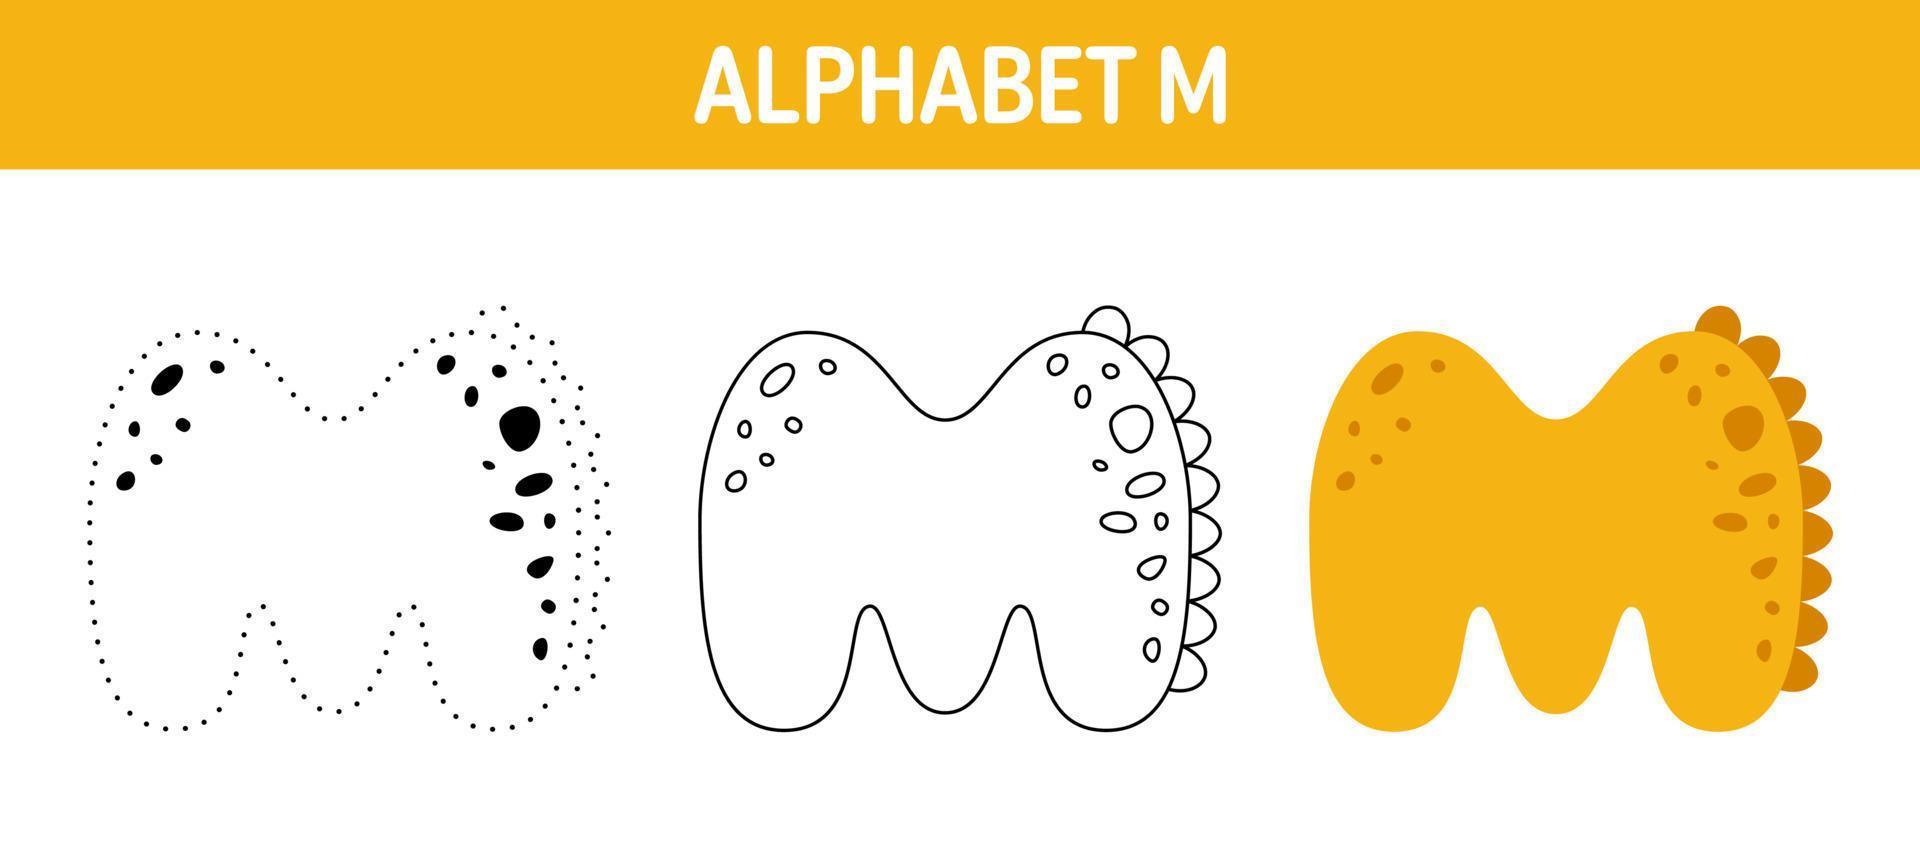 Alphabet M tracing and coloring worksheet for kids vector